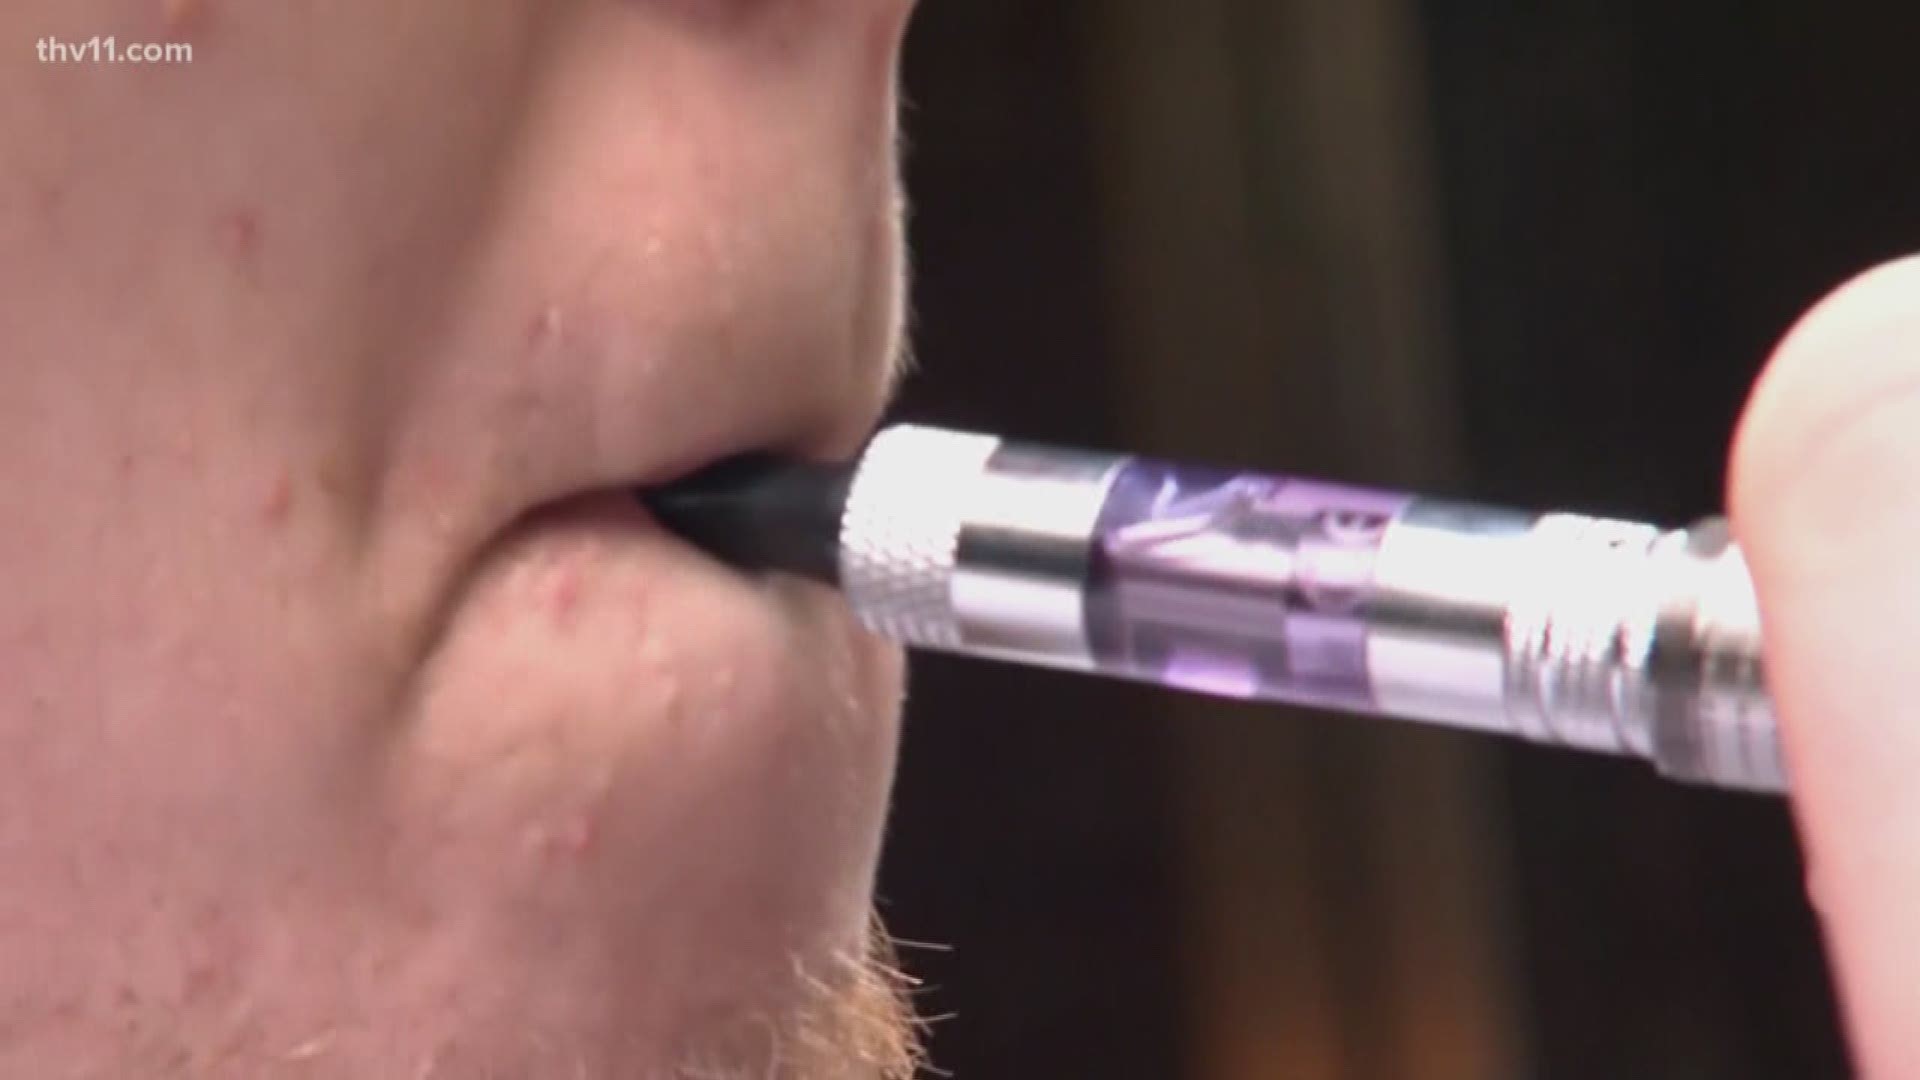 The Trump Administration is considering banning some non-tobacco, flavored vaping products. That announcement came as the FDA and CDC try to get a handle on the hundreds of vaping-related lung illnesses.